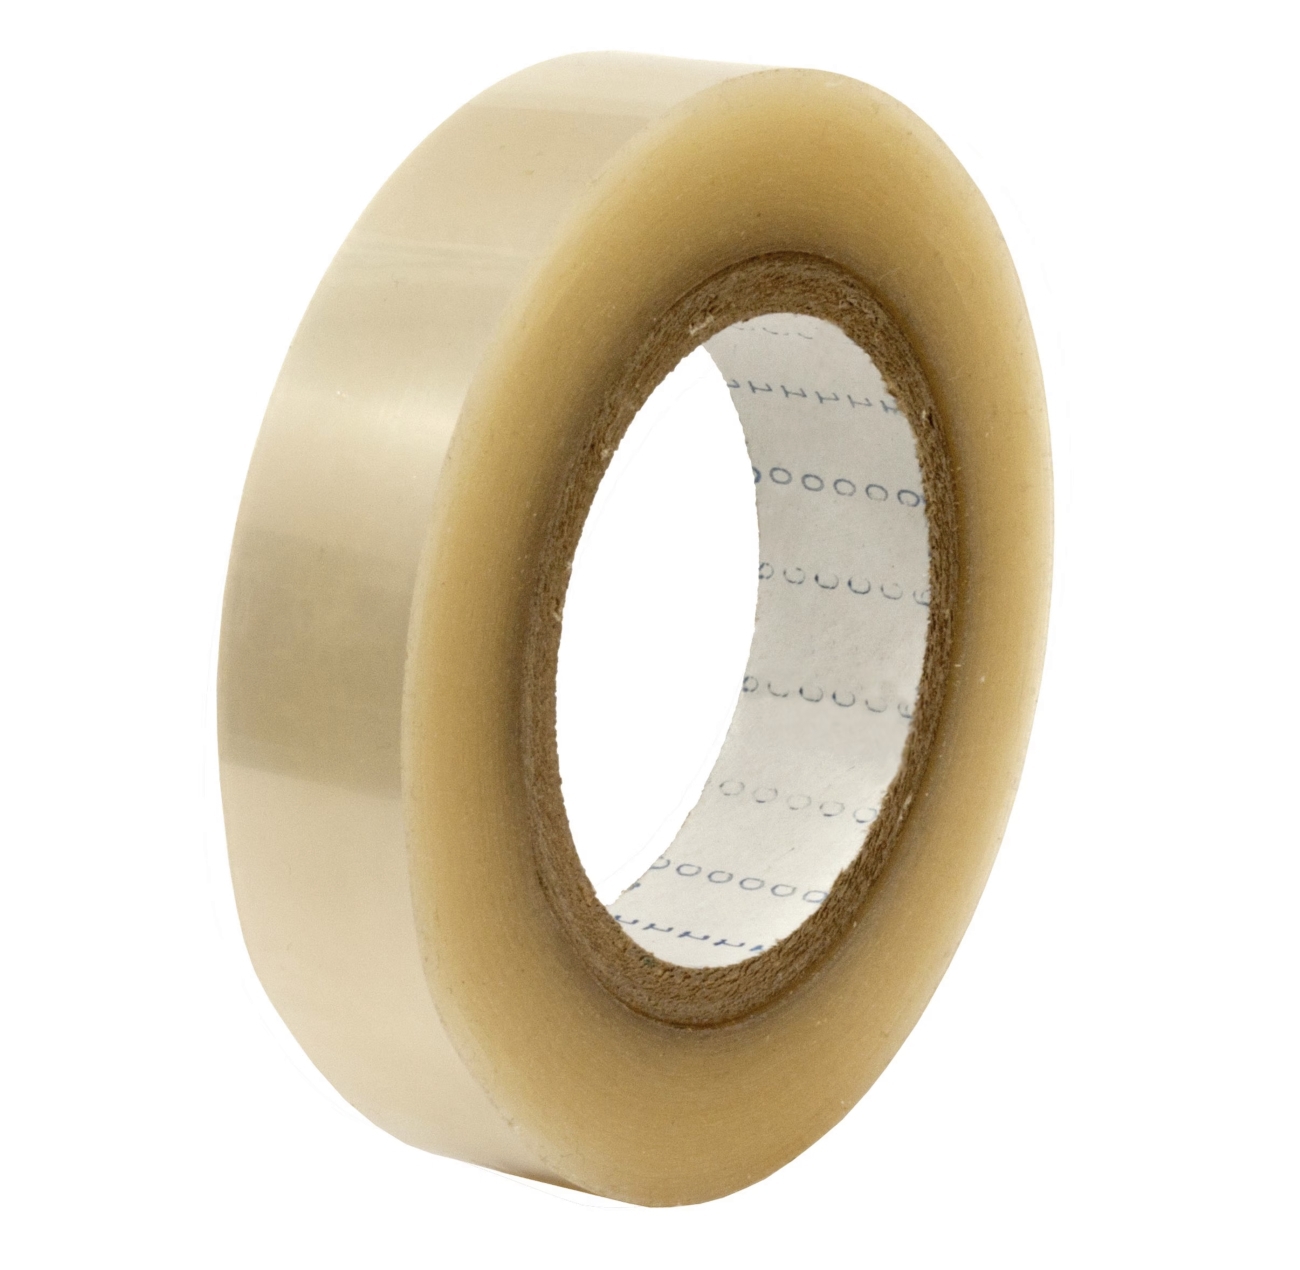 S-K-S dubbelzijdige kleefband met polyester drager 960, transparant, 12 mm x 66 m, siliconen kleefband, 0,085 mm